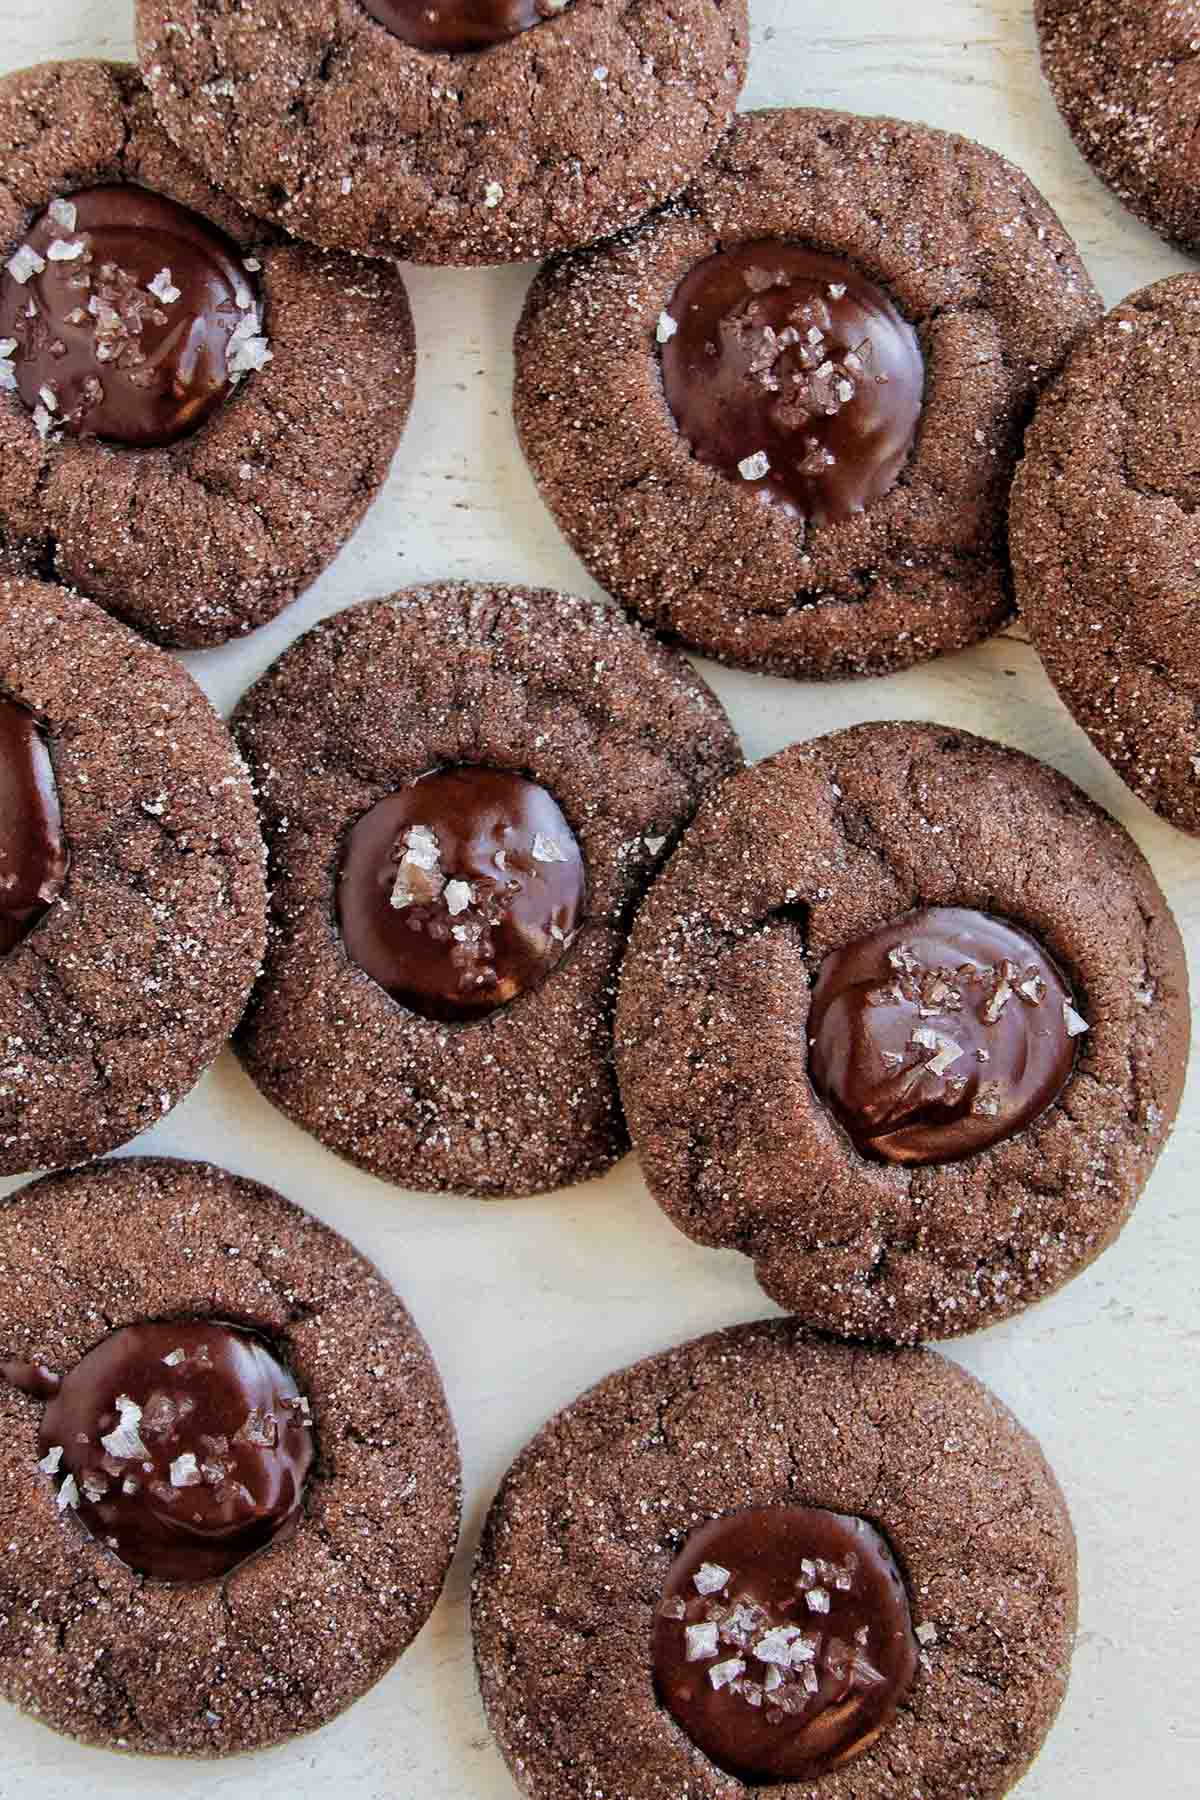 thumbprint chocolate filled cookies.